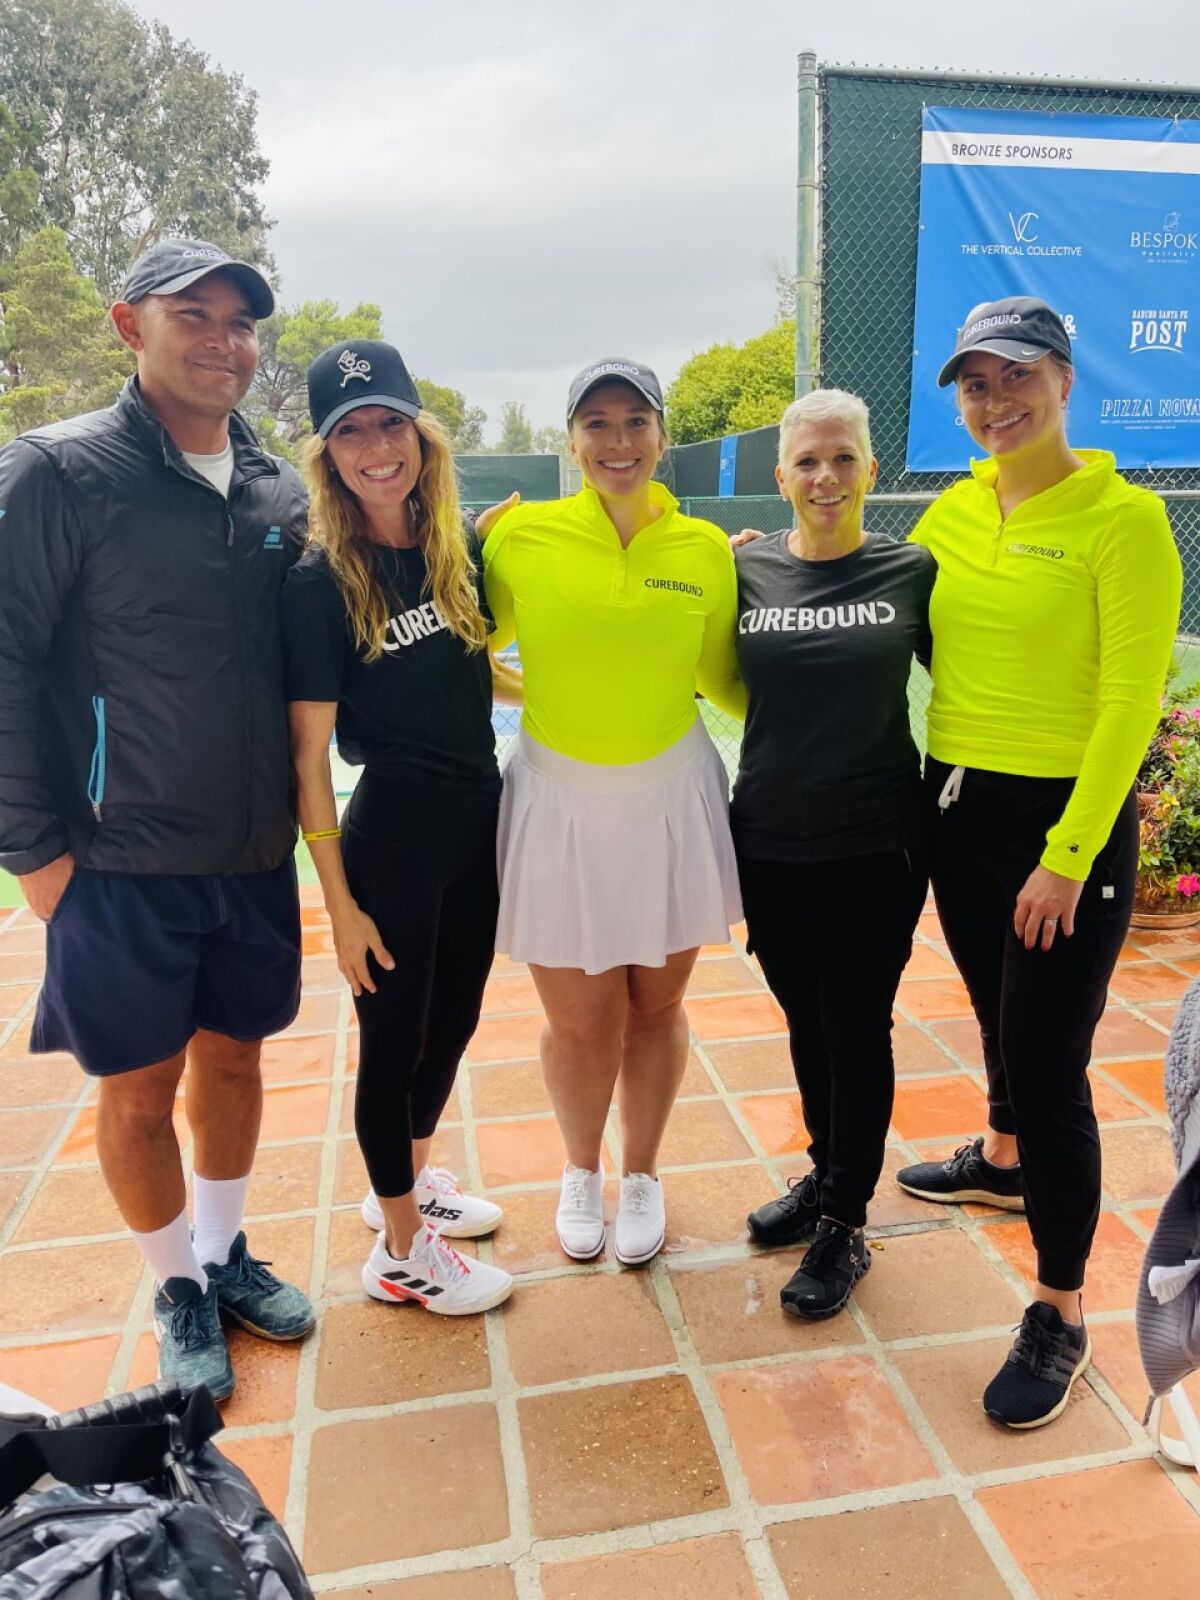 The Rancho Santa Fe Tennis Club hosted Pickle the Cure